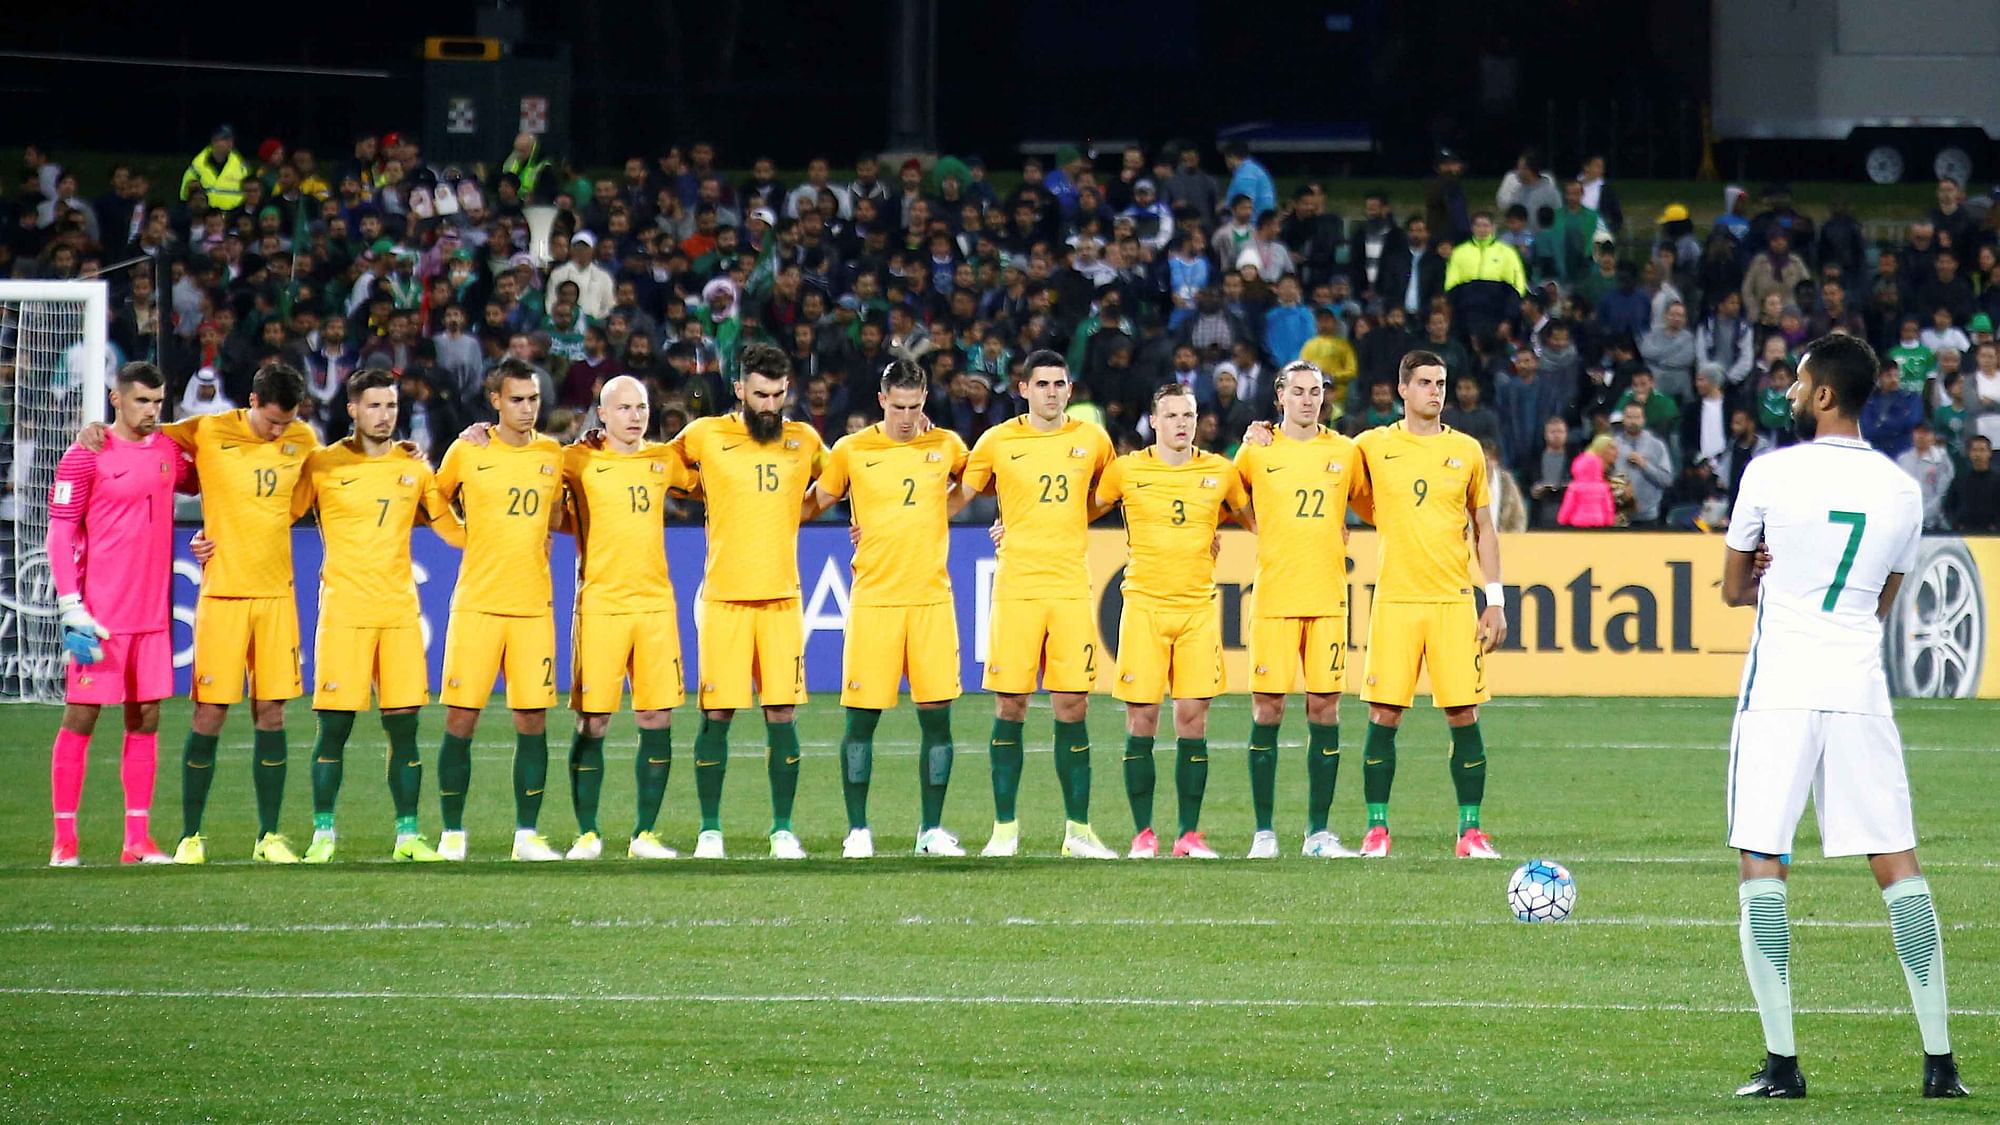 While the Australian players maintained silence, the Saudi Arabians took their positions. (Photo: Reuters)